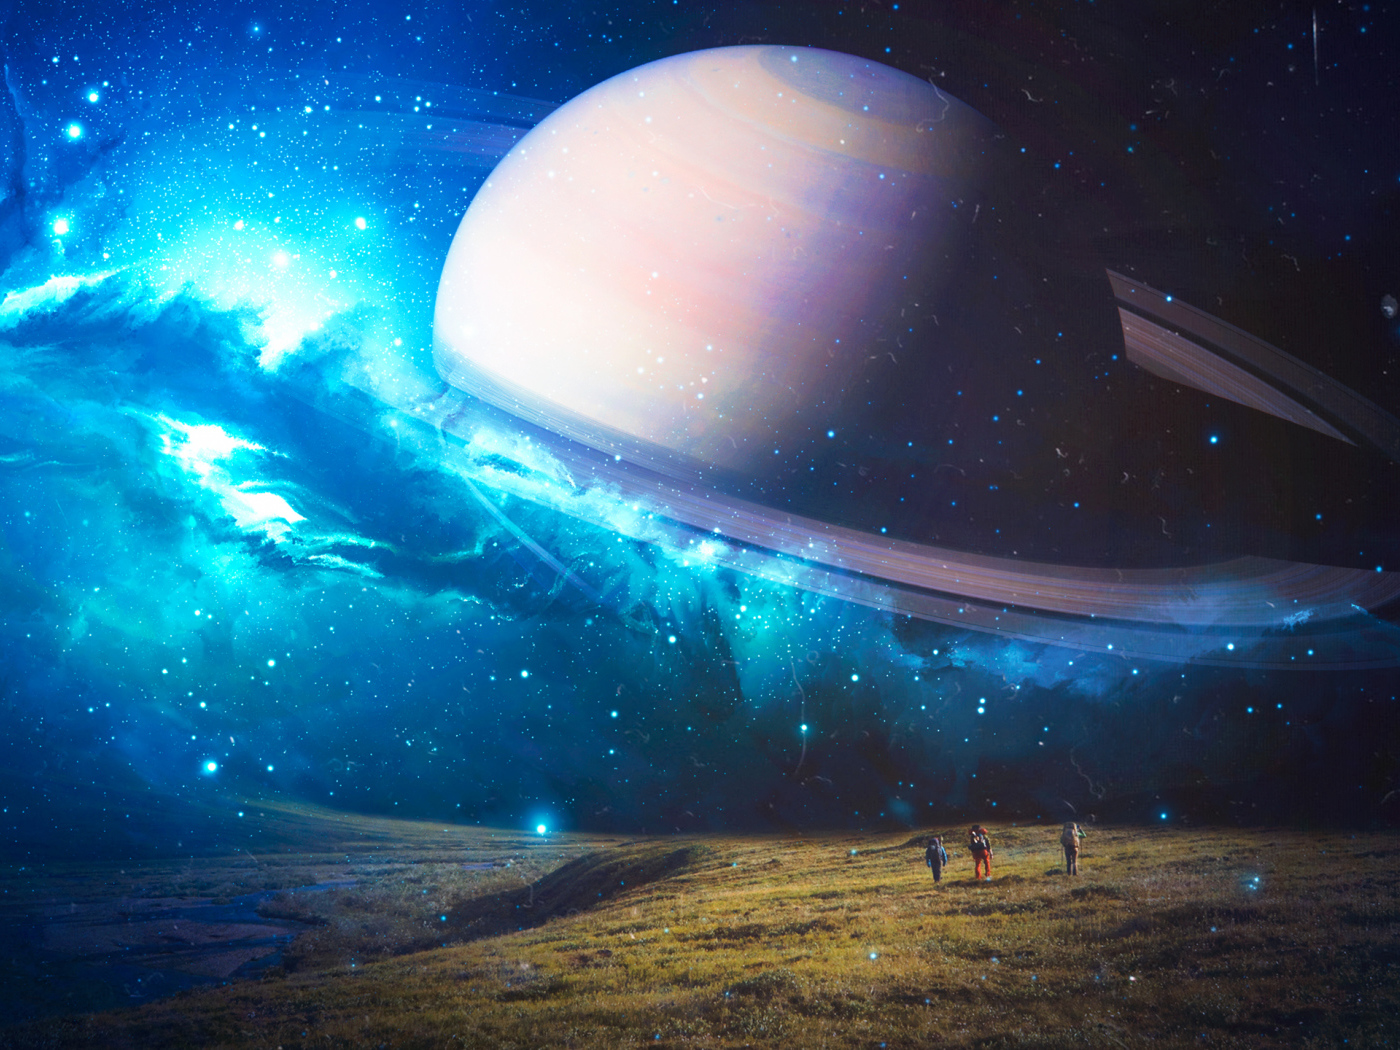 Saturn big planet in neon sky above the earth